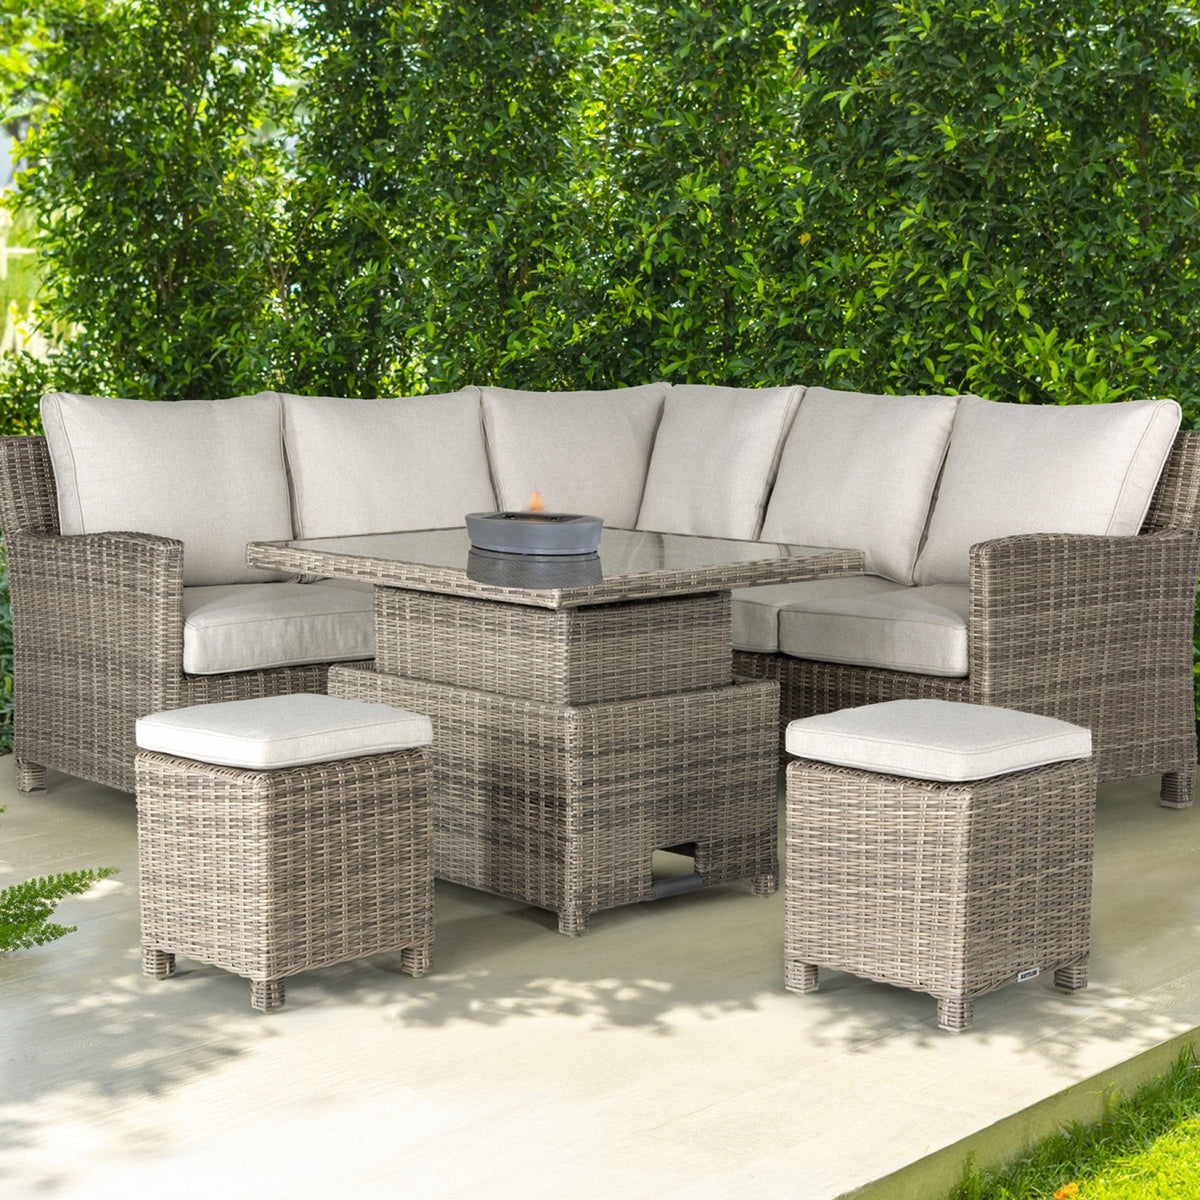 Kettler Palma Signature Mini Corner Oyster Wicker Outdoor Sofa Set with High Low Glass Top Table